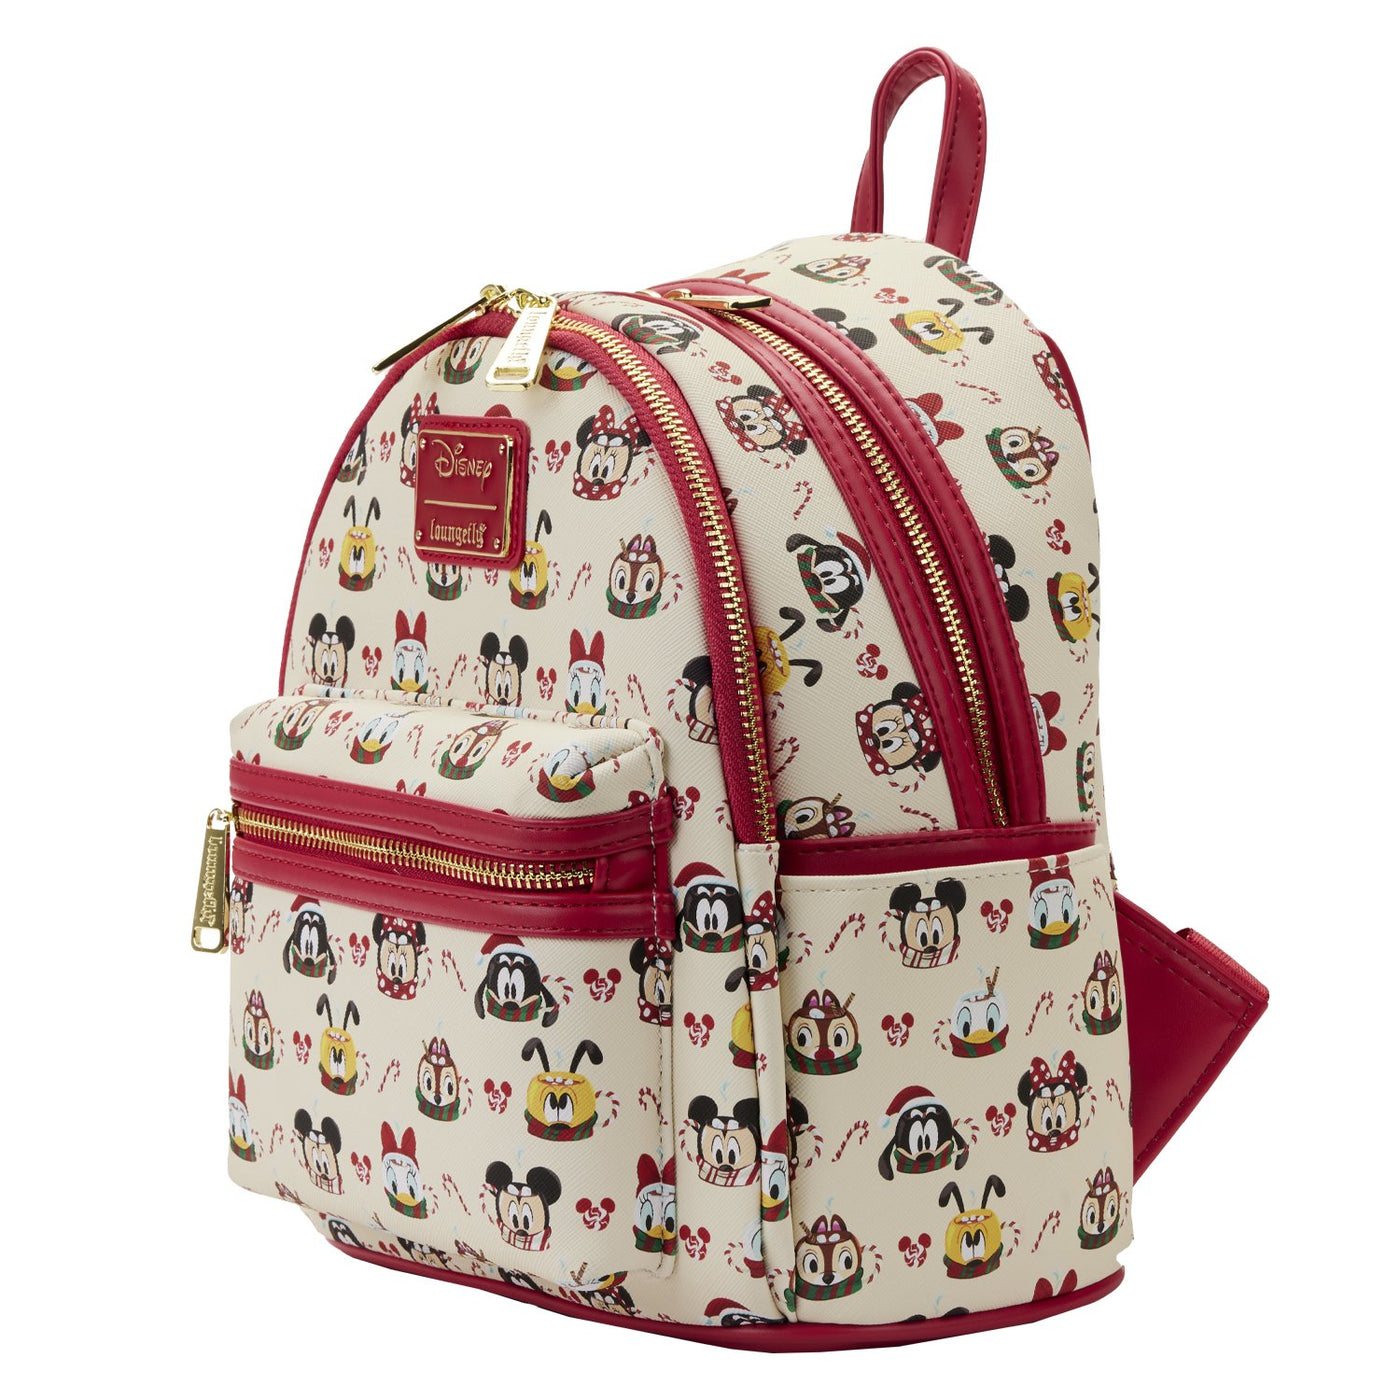 Loungefly Disney Hot Cocoa Allover Print Mini Backpack with Headband Combo - Side View